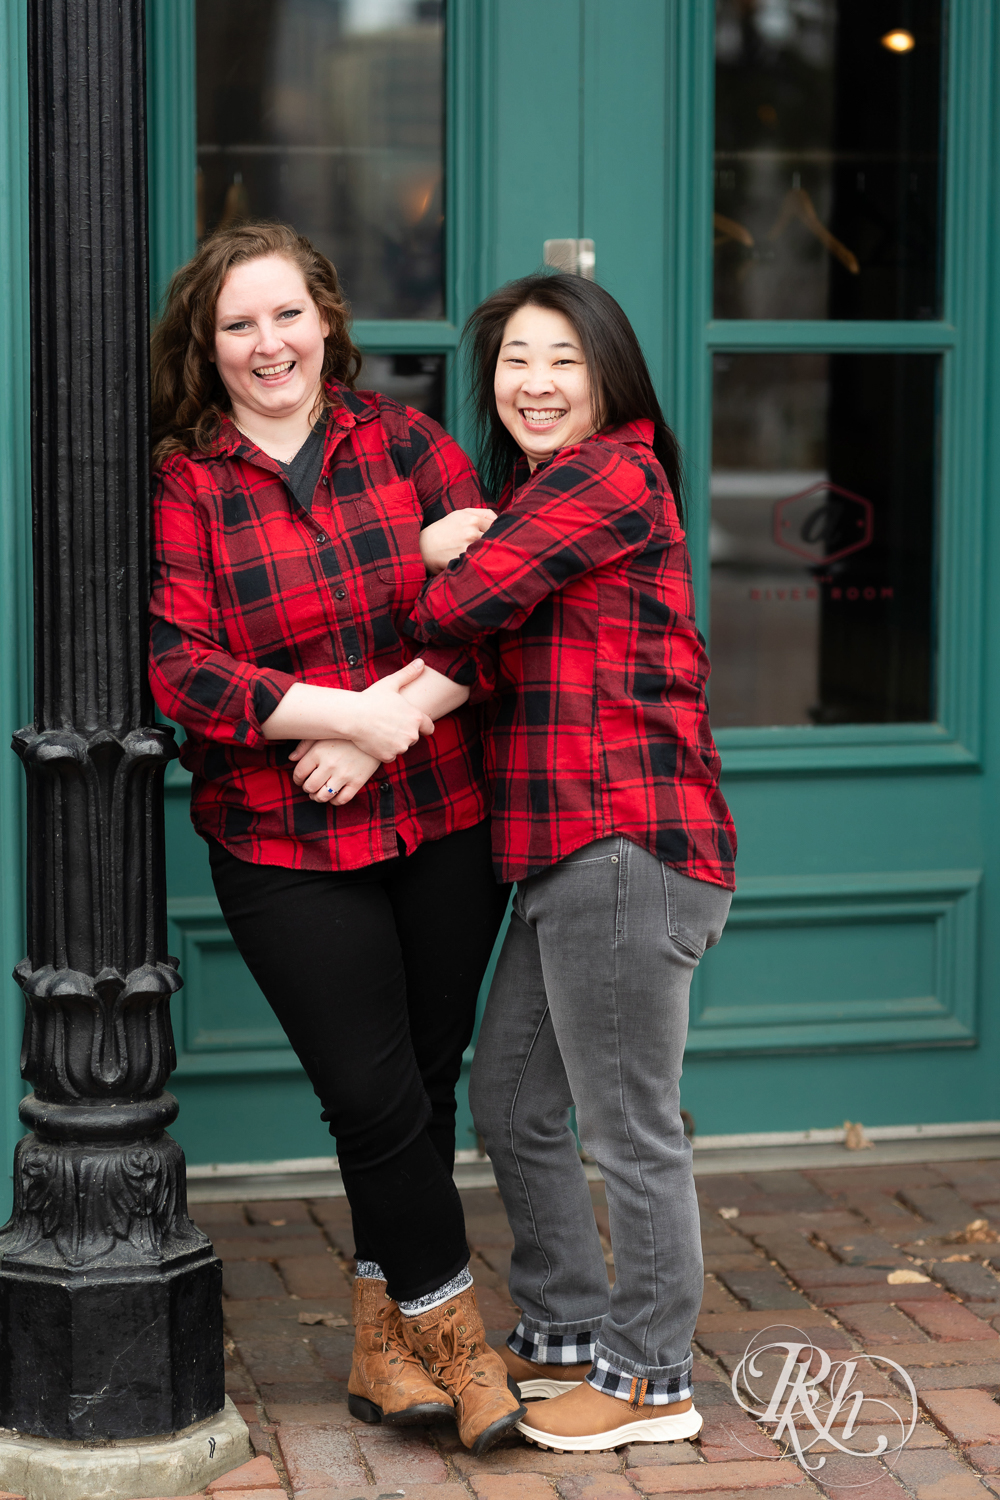 Red headed woman and Asian woman in red flannels smile during winter engagement photography in Minneapolis, Minnesota.